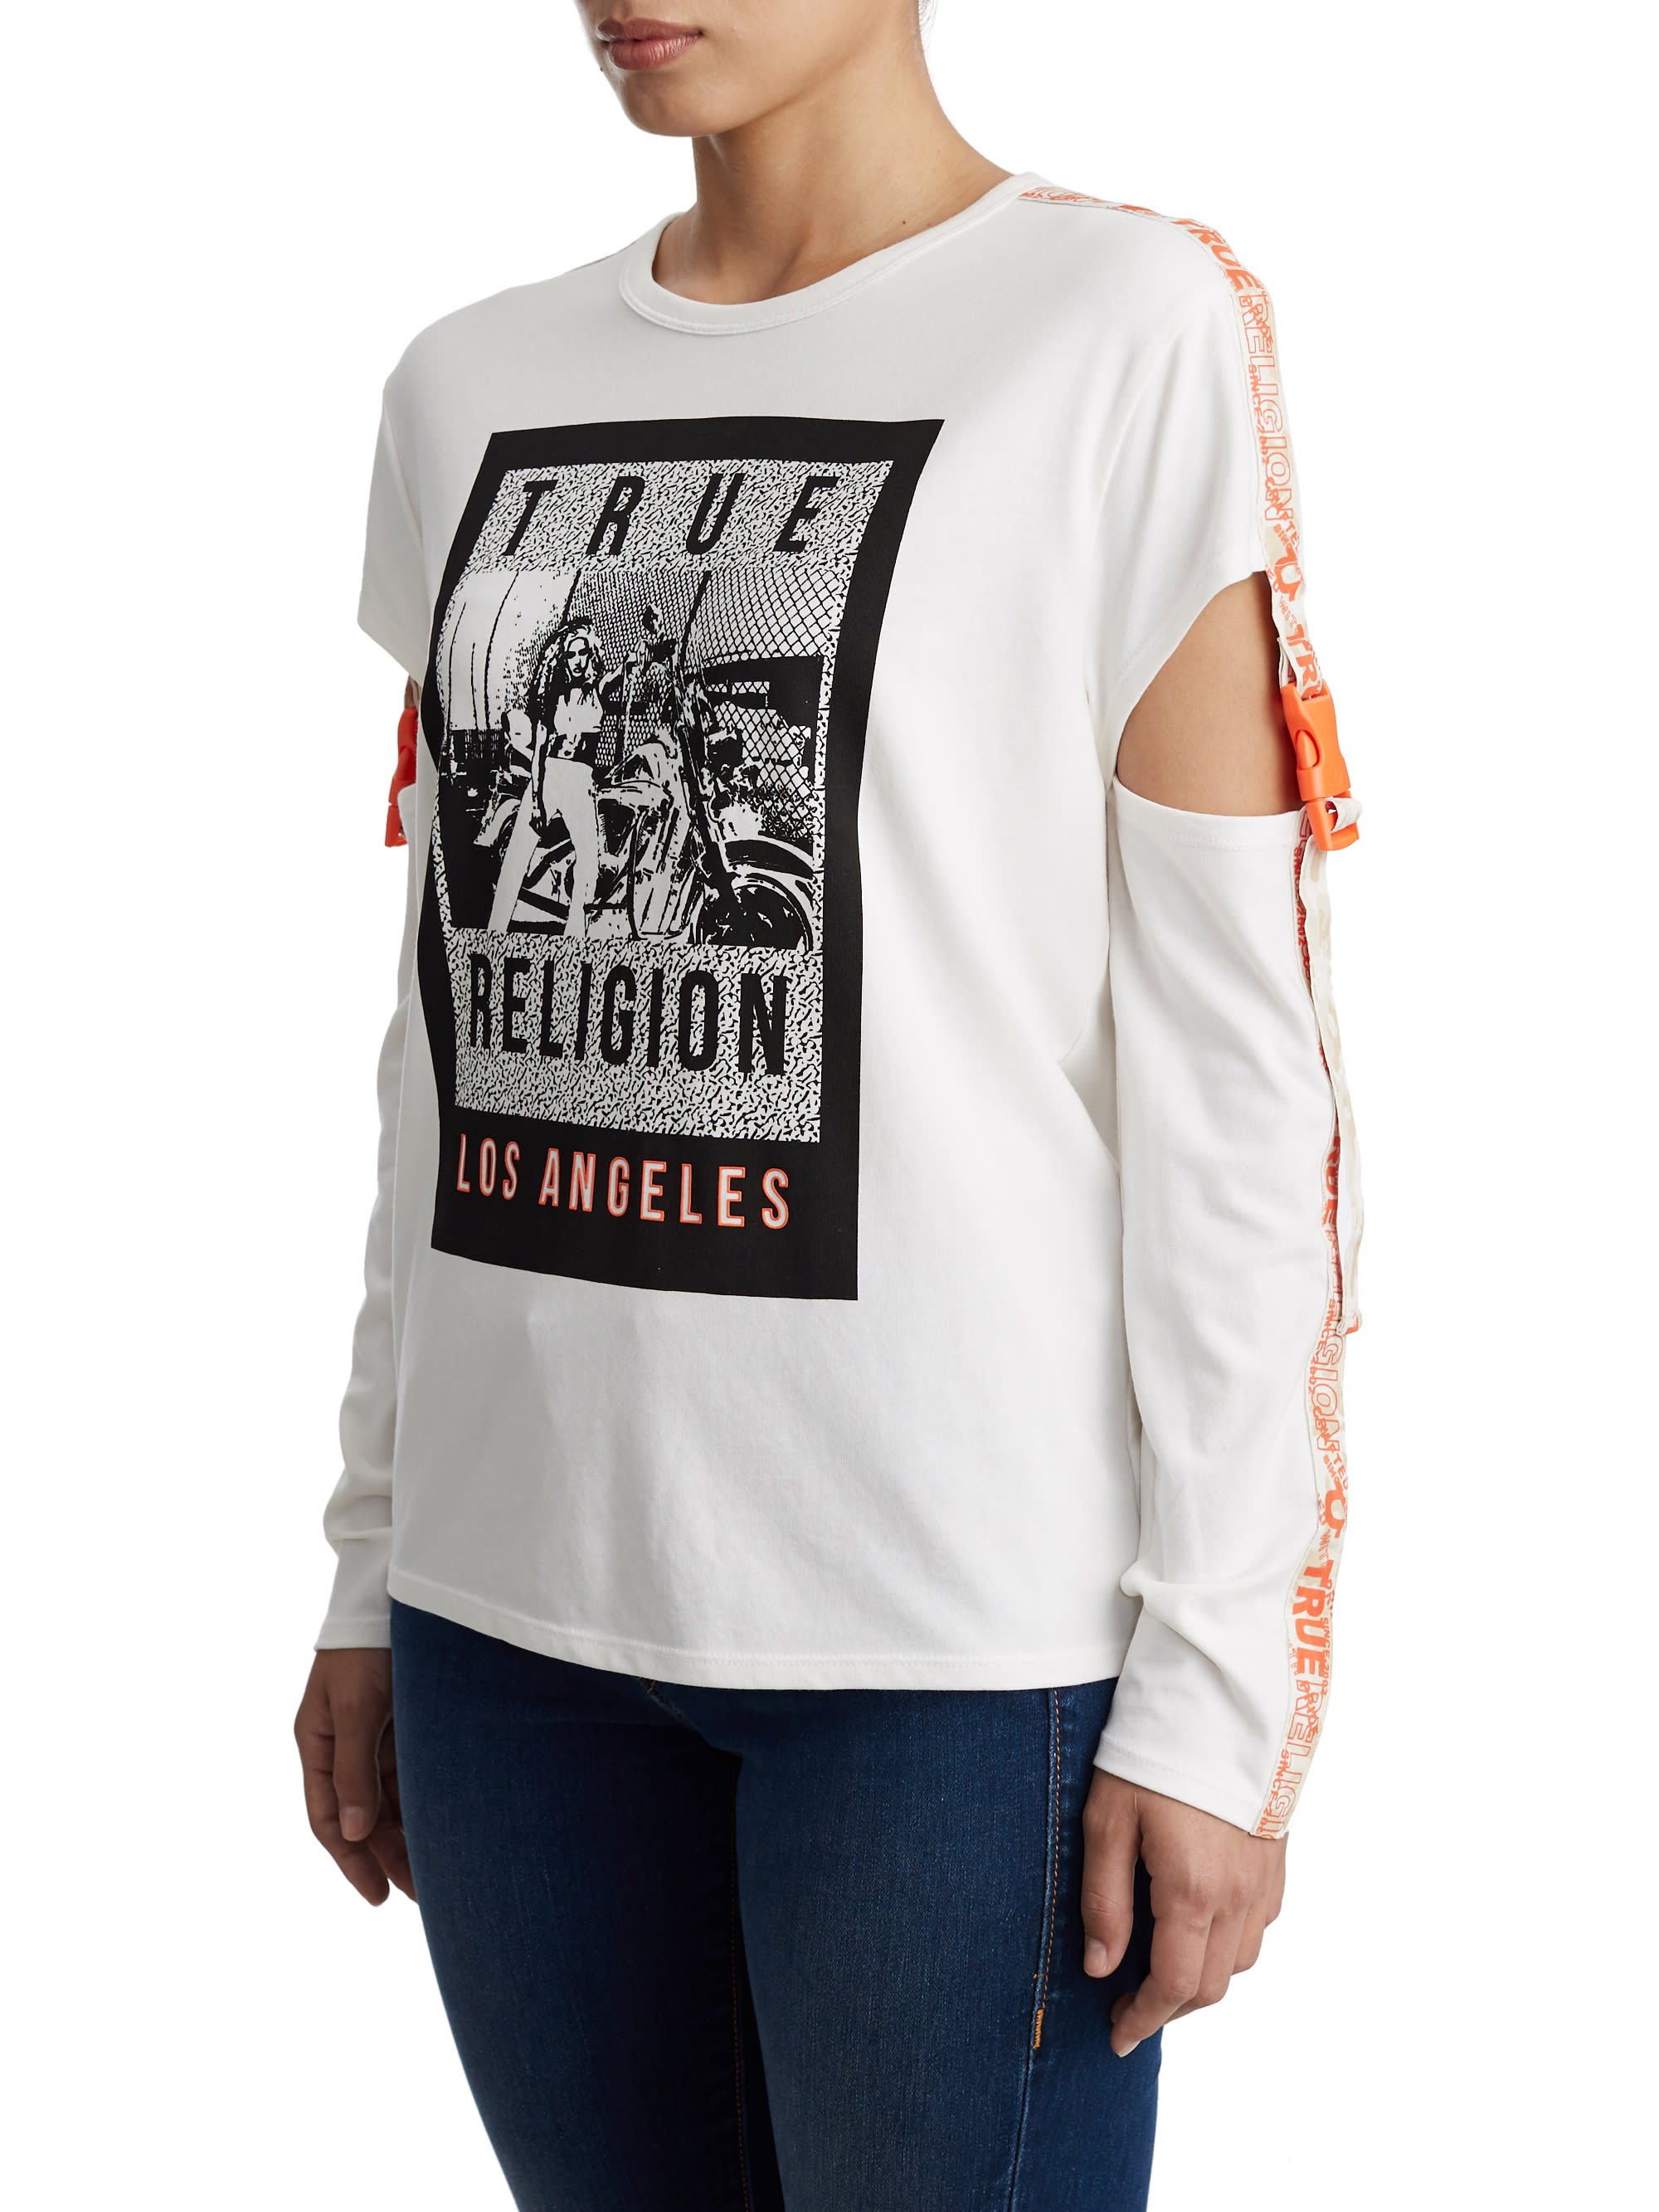 WOMENS CUT OUT GRAPHIC SHIRT W/ SNAPS